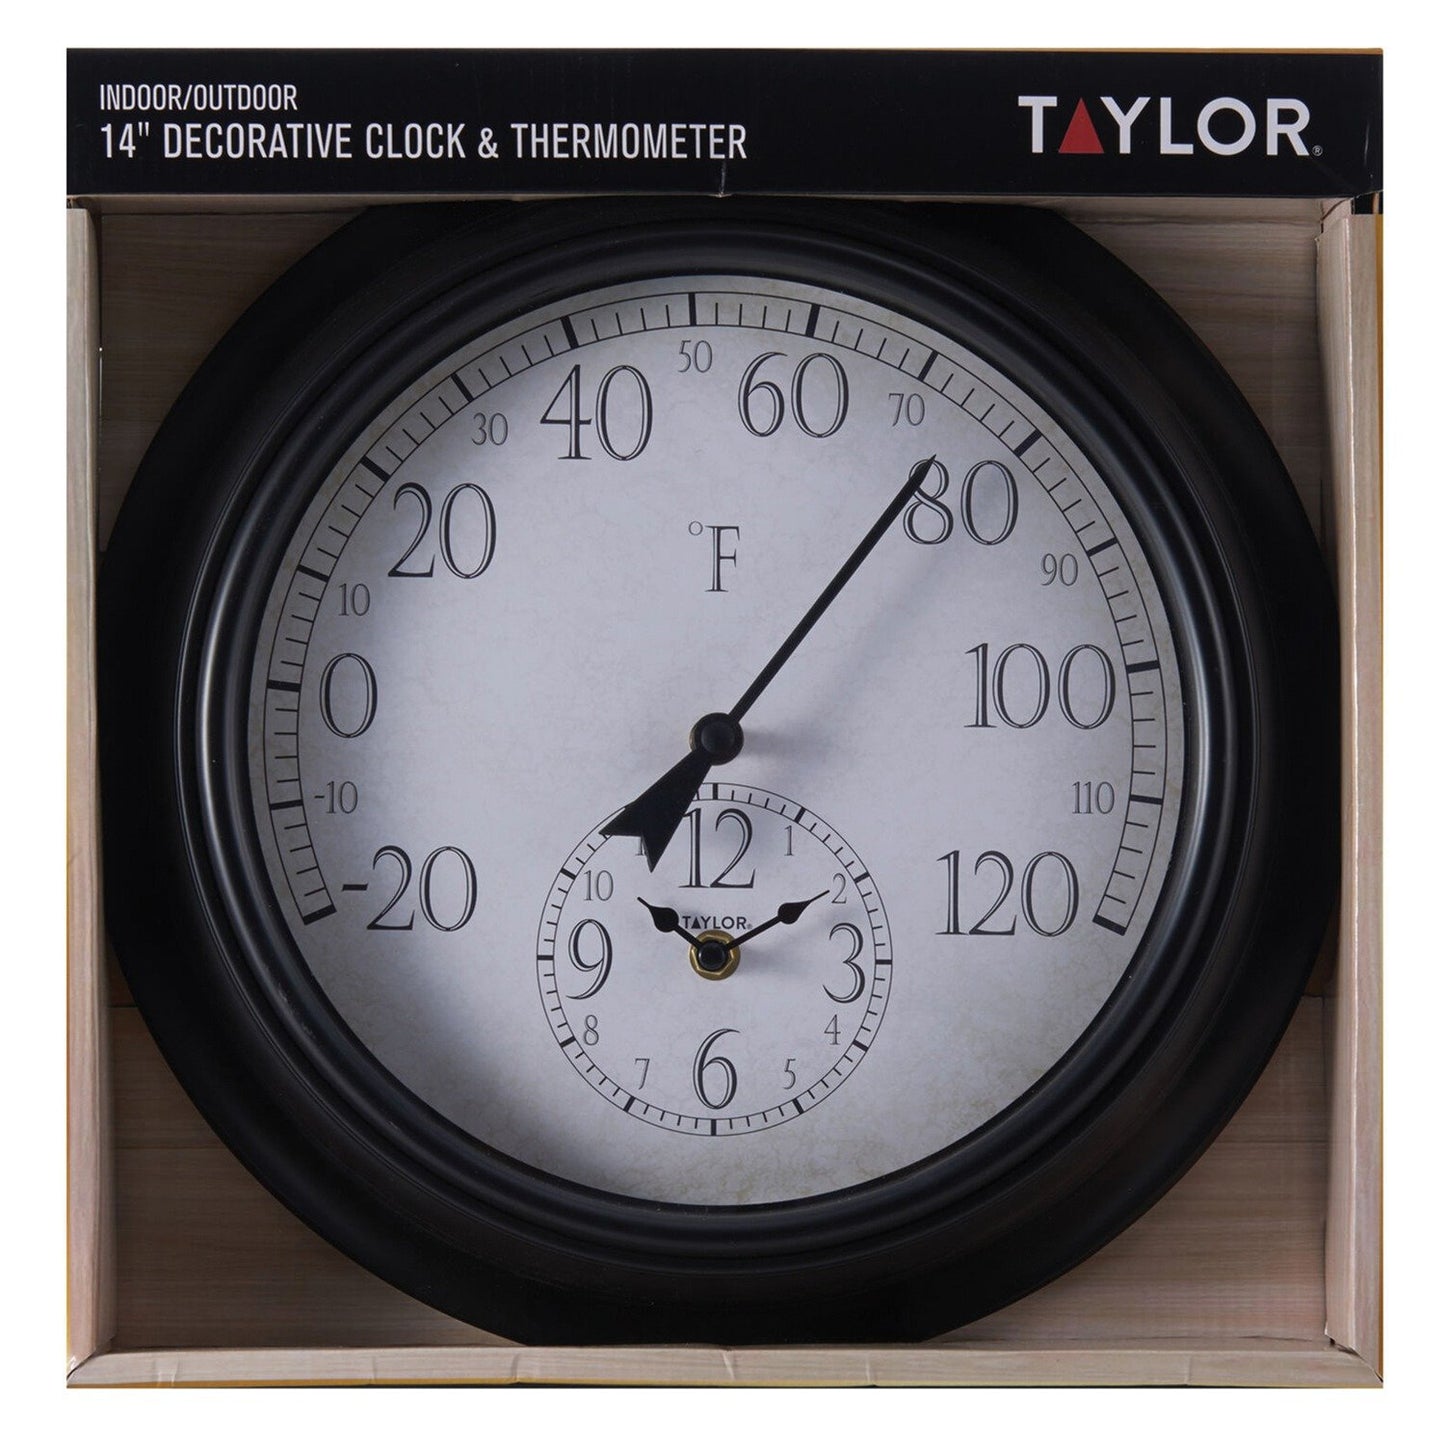 Taylor Precision Prod. 91575T 14-Inch Decorative Thermometer with Clock